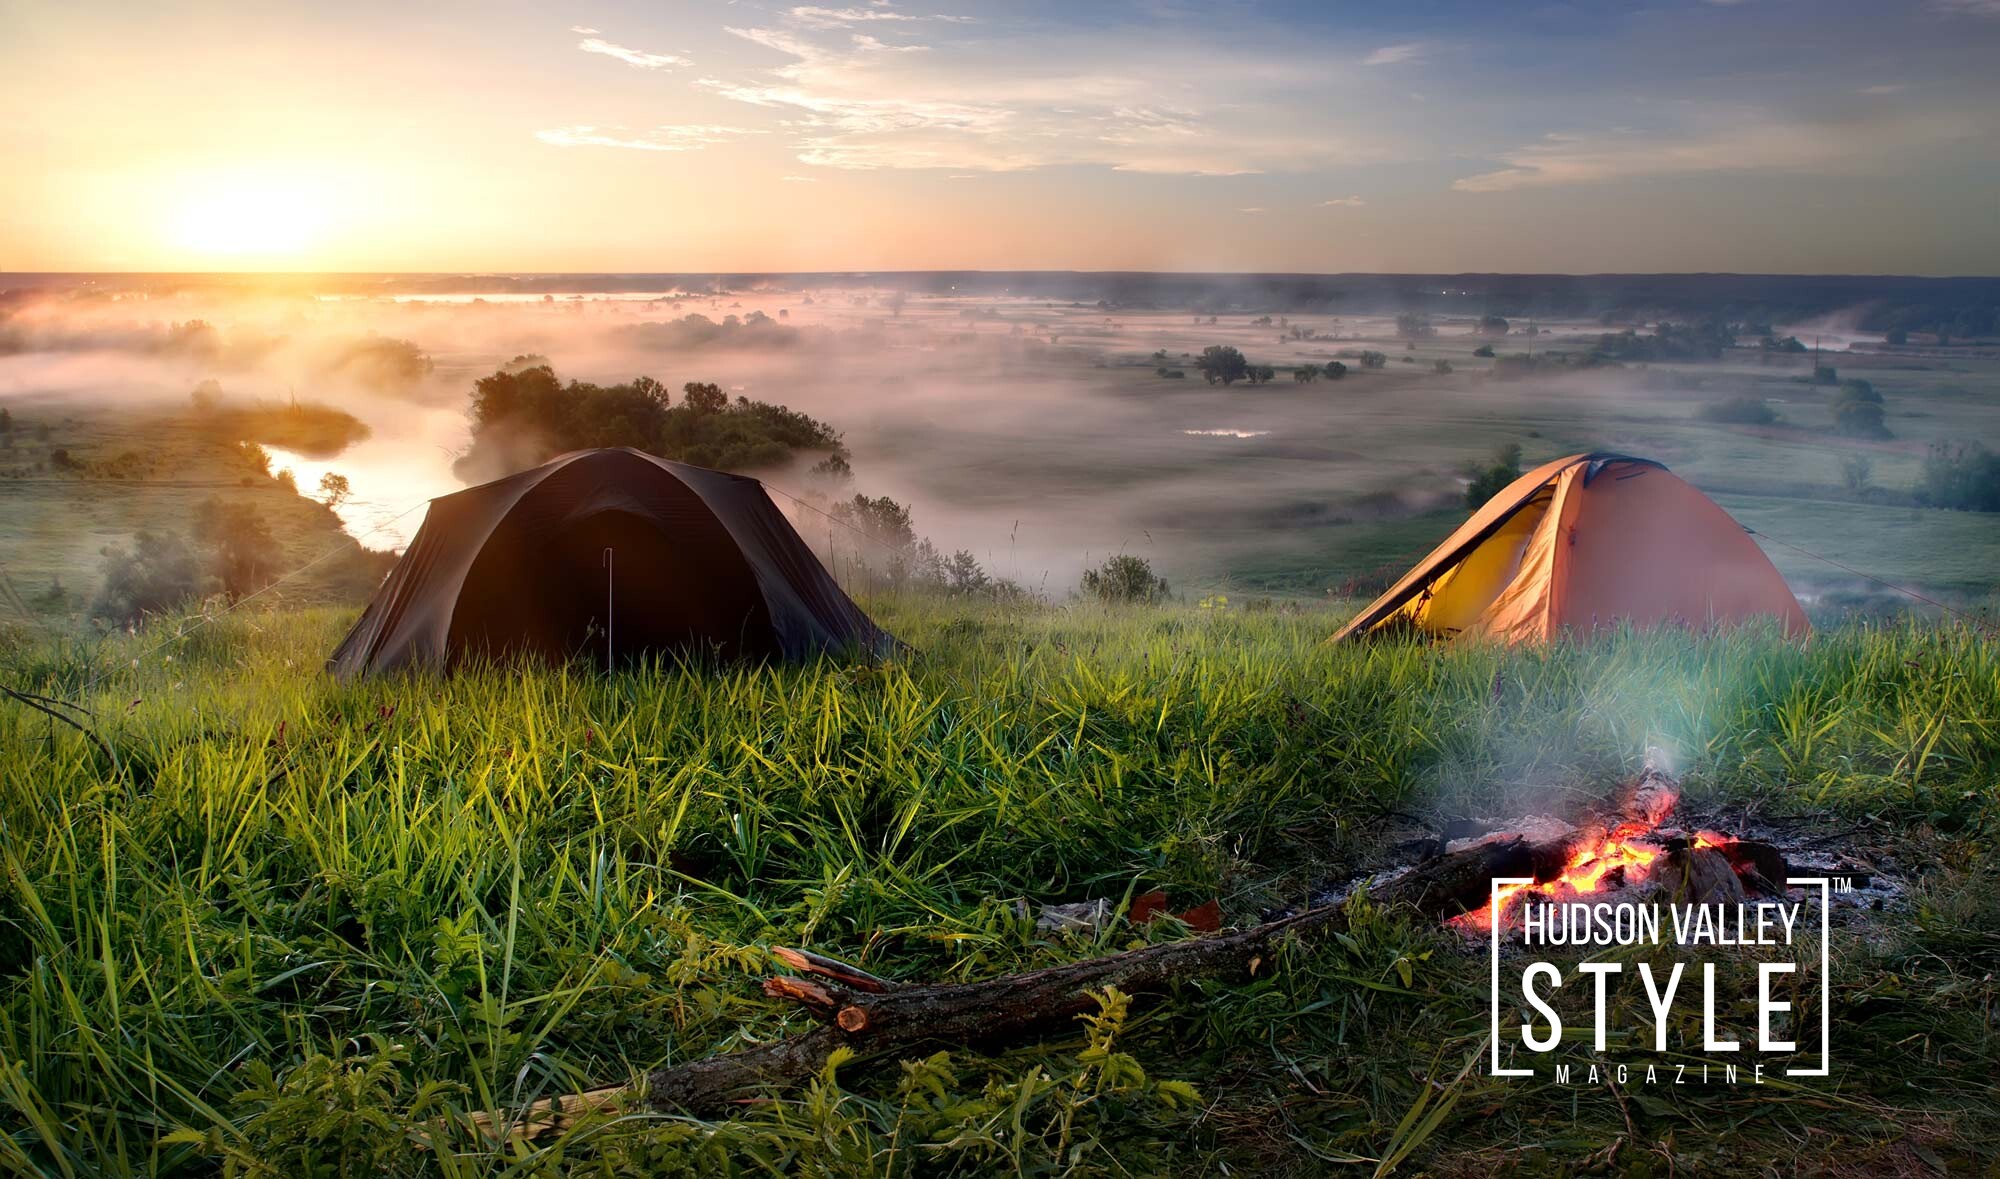 Should You Buy or Rent Your Camping Gear